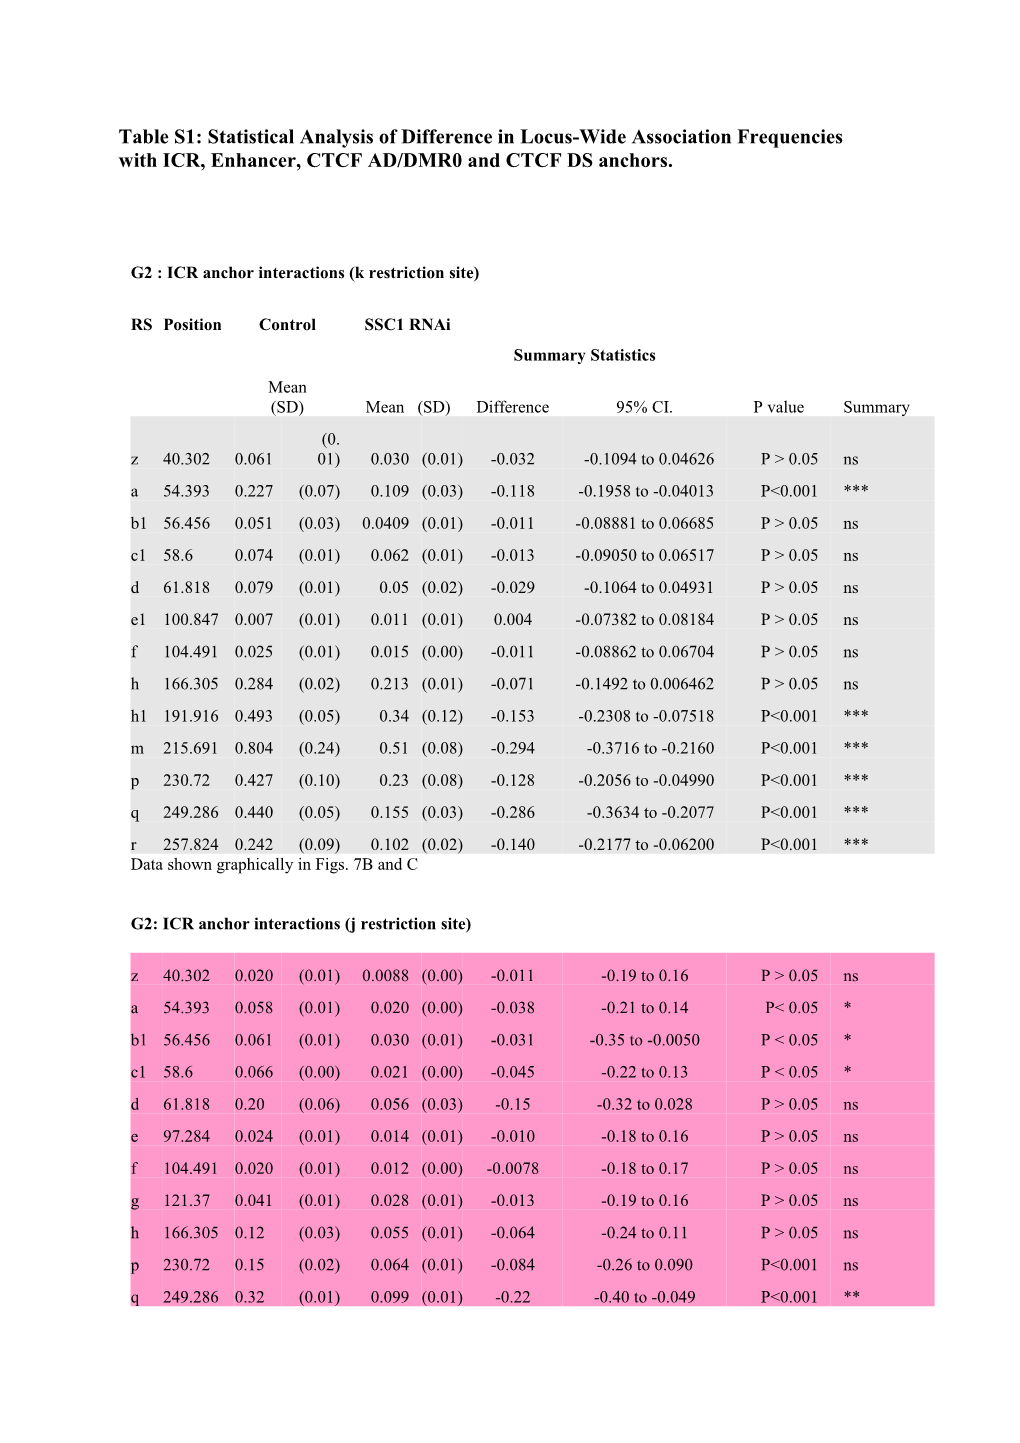 Table S1: Statistical Analysis of Difference in Locus-Wide Association Frequencies With